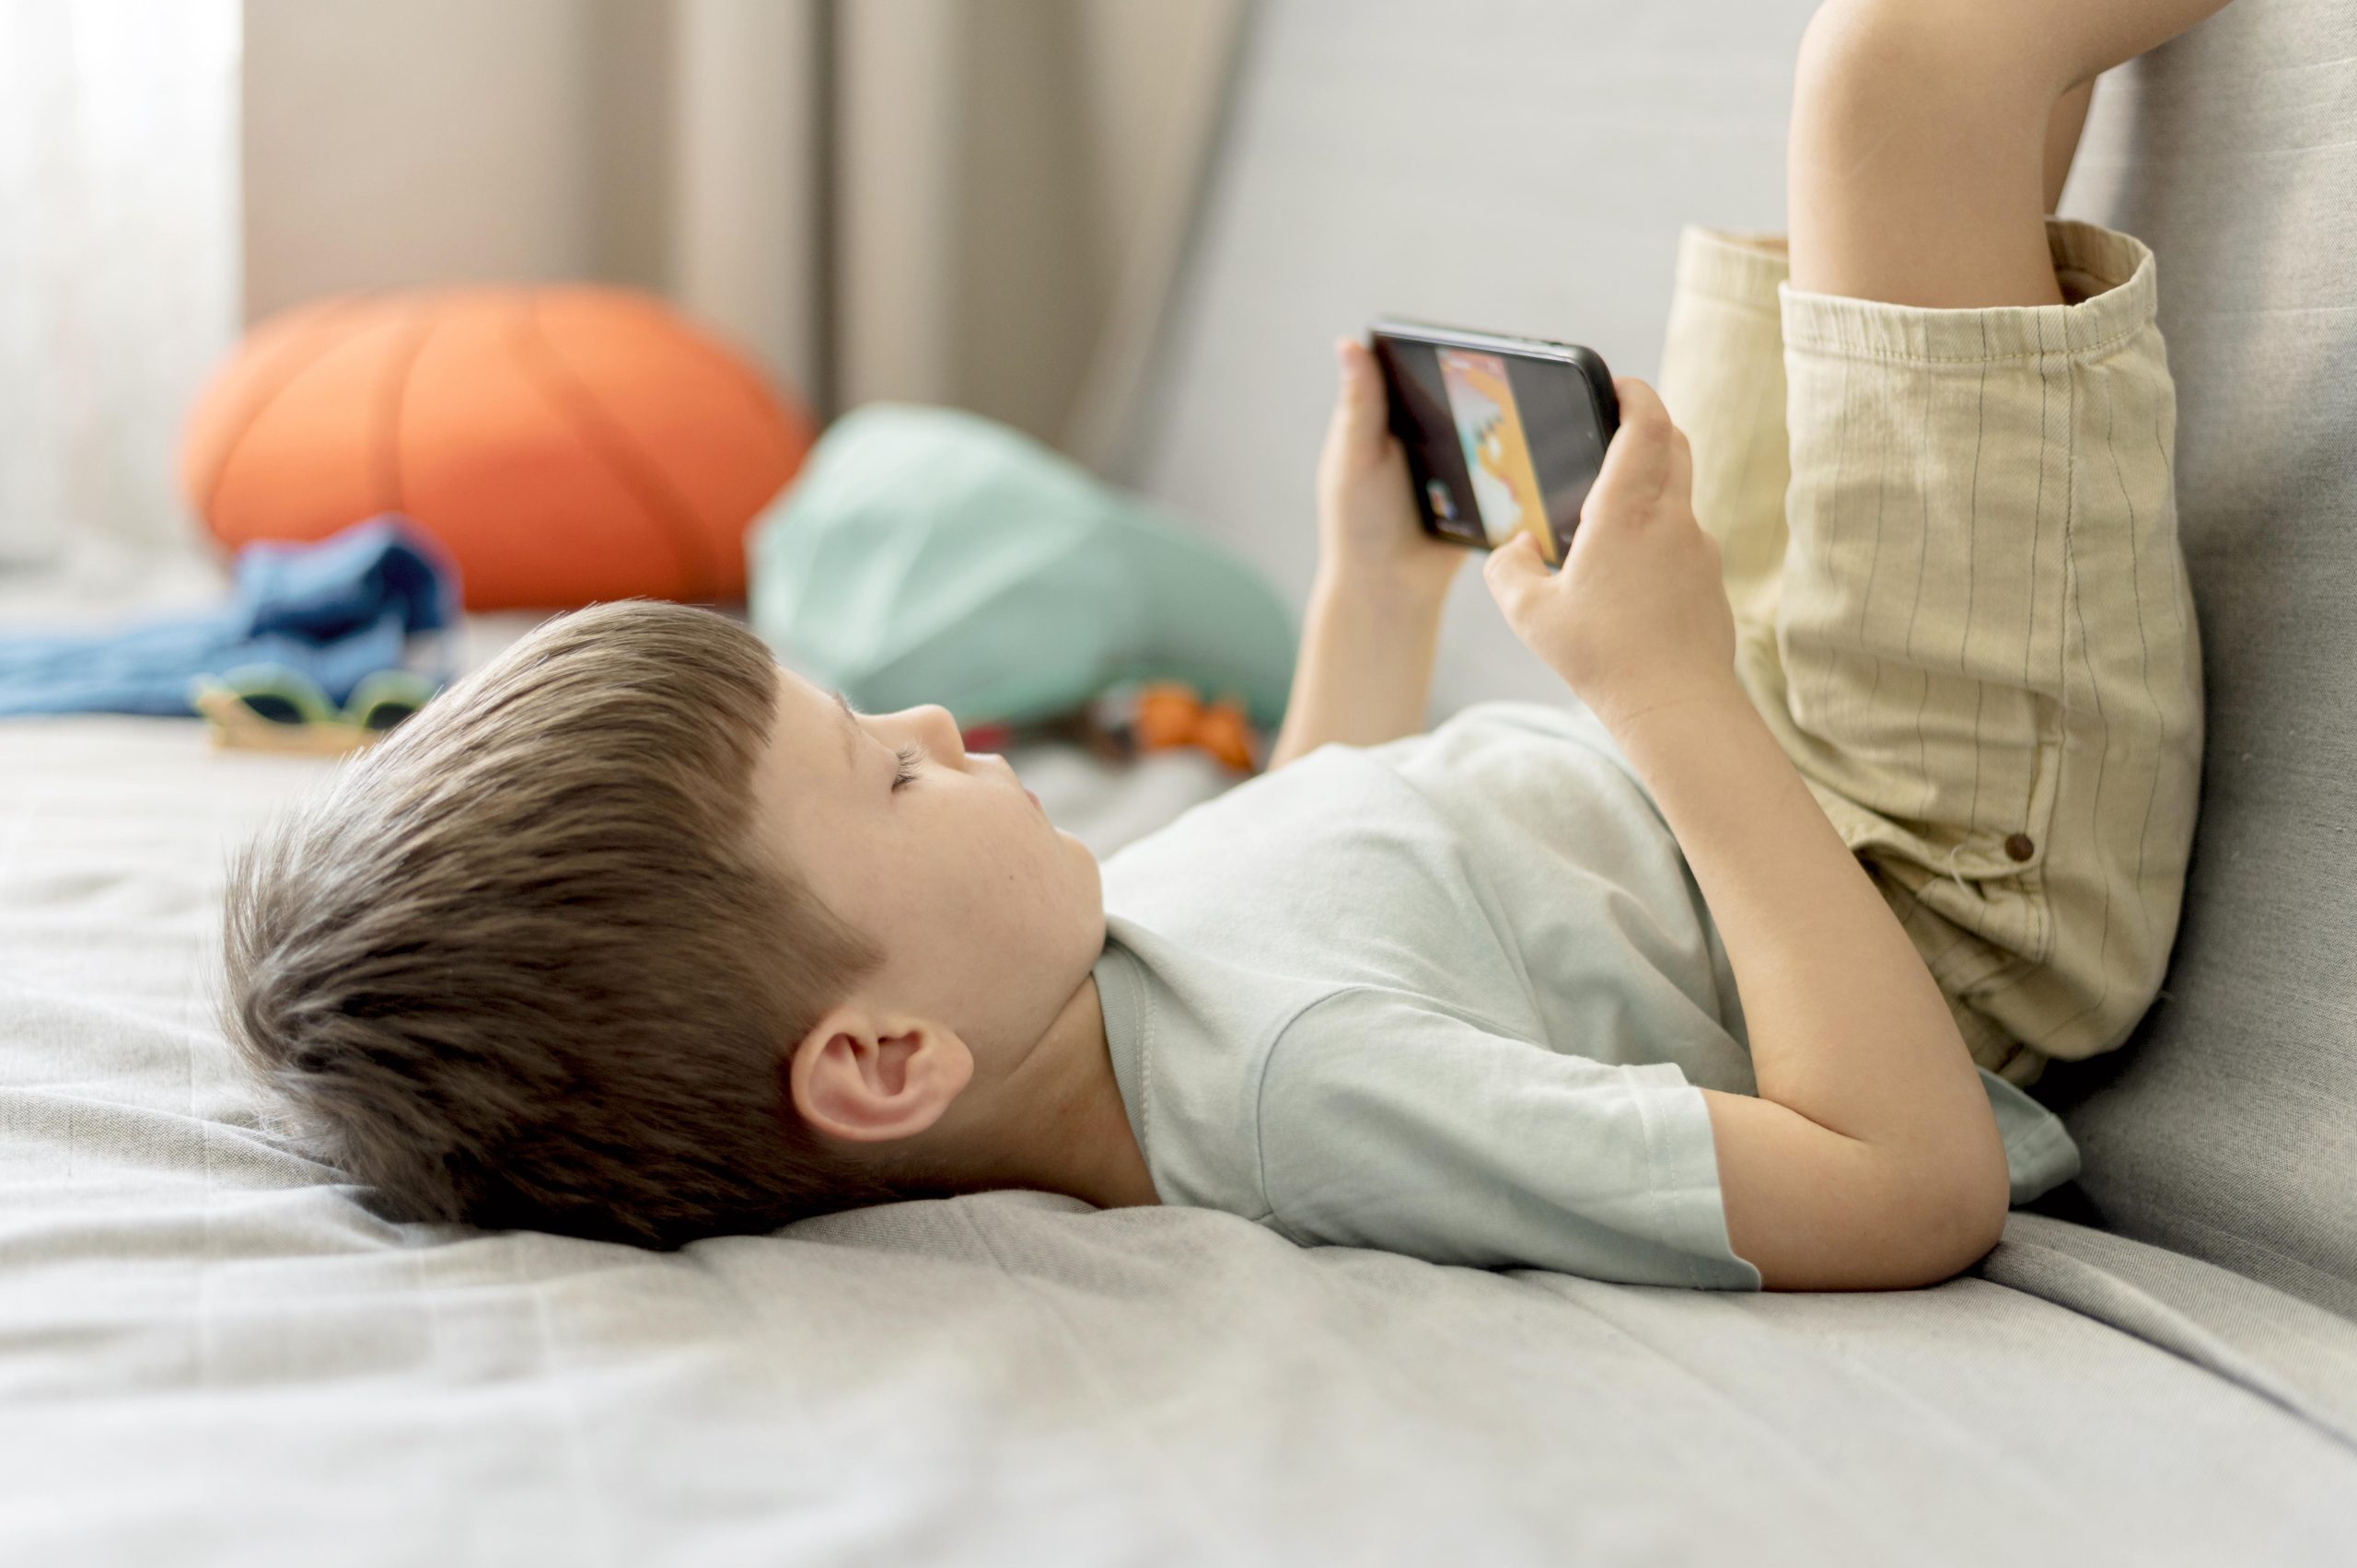 Health Consequences of Excessive Screen Time